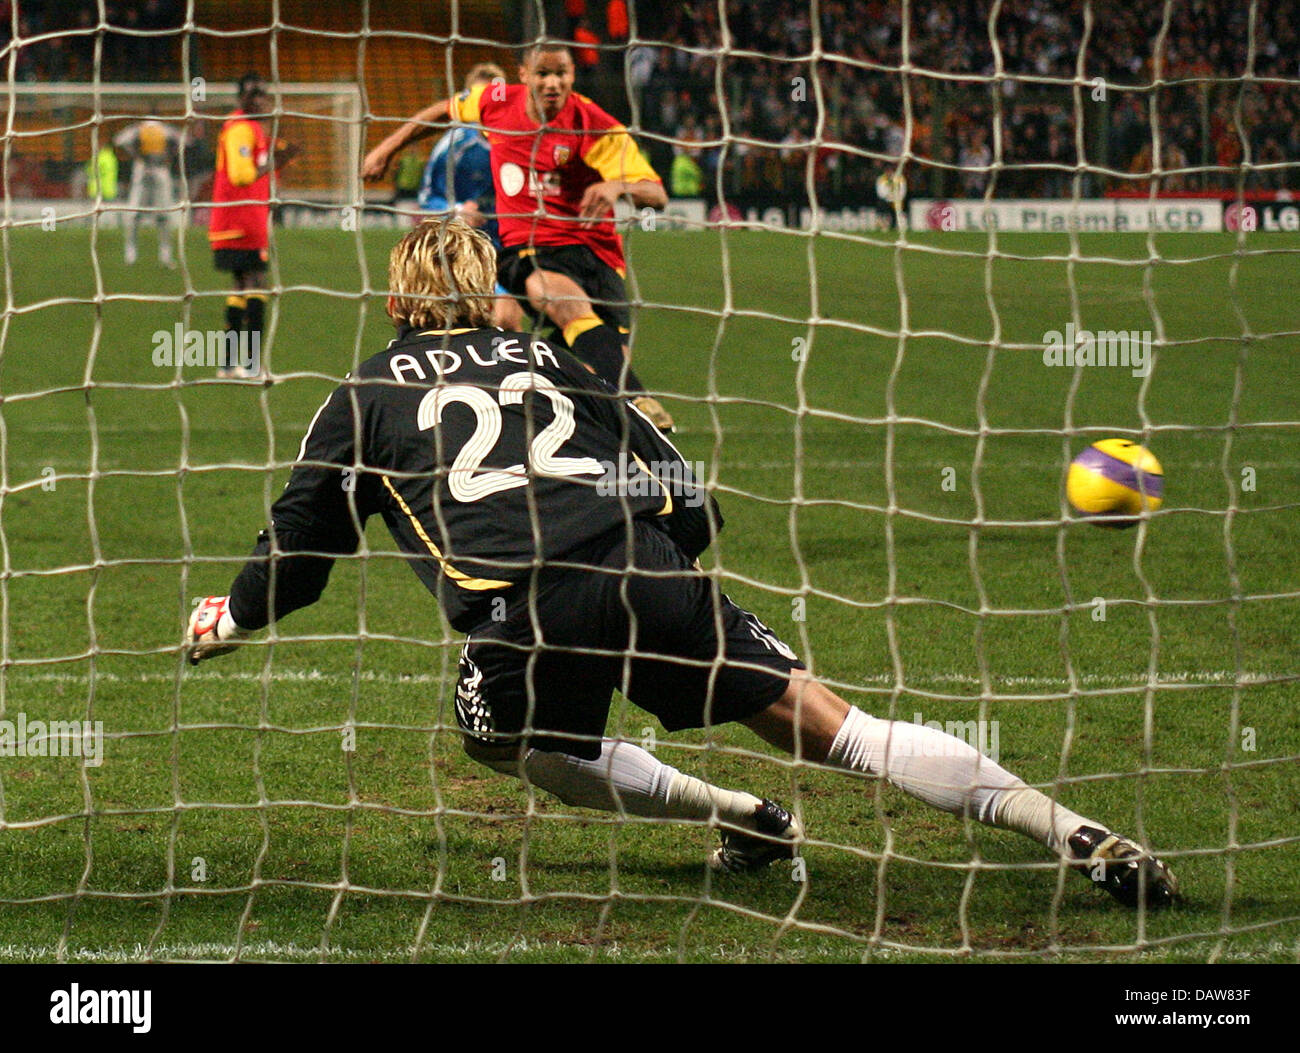 Goalkeeper Rene Adler of Leverkusen fails to hold Daniel Cousin's (back) penalty shot which causes Lens' lead of 2-1 during the UEFA Cup match RC Lens vs Bayer 04 Leverkusen at Félix-Bollaert Stadium in Lens, France, Thursday 08 March 2007. Leverkusen lost to Lens by 1-2. Photo: Felix Heyder Stock Photo